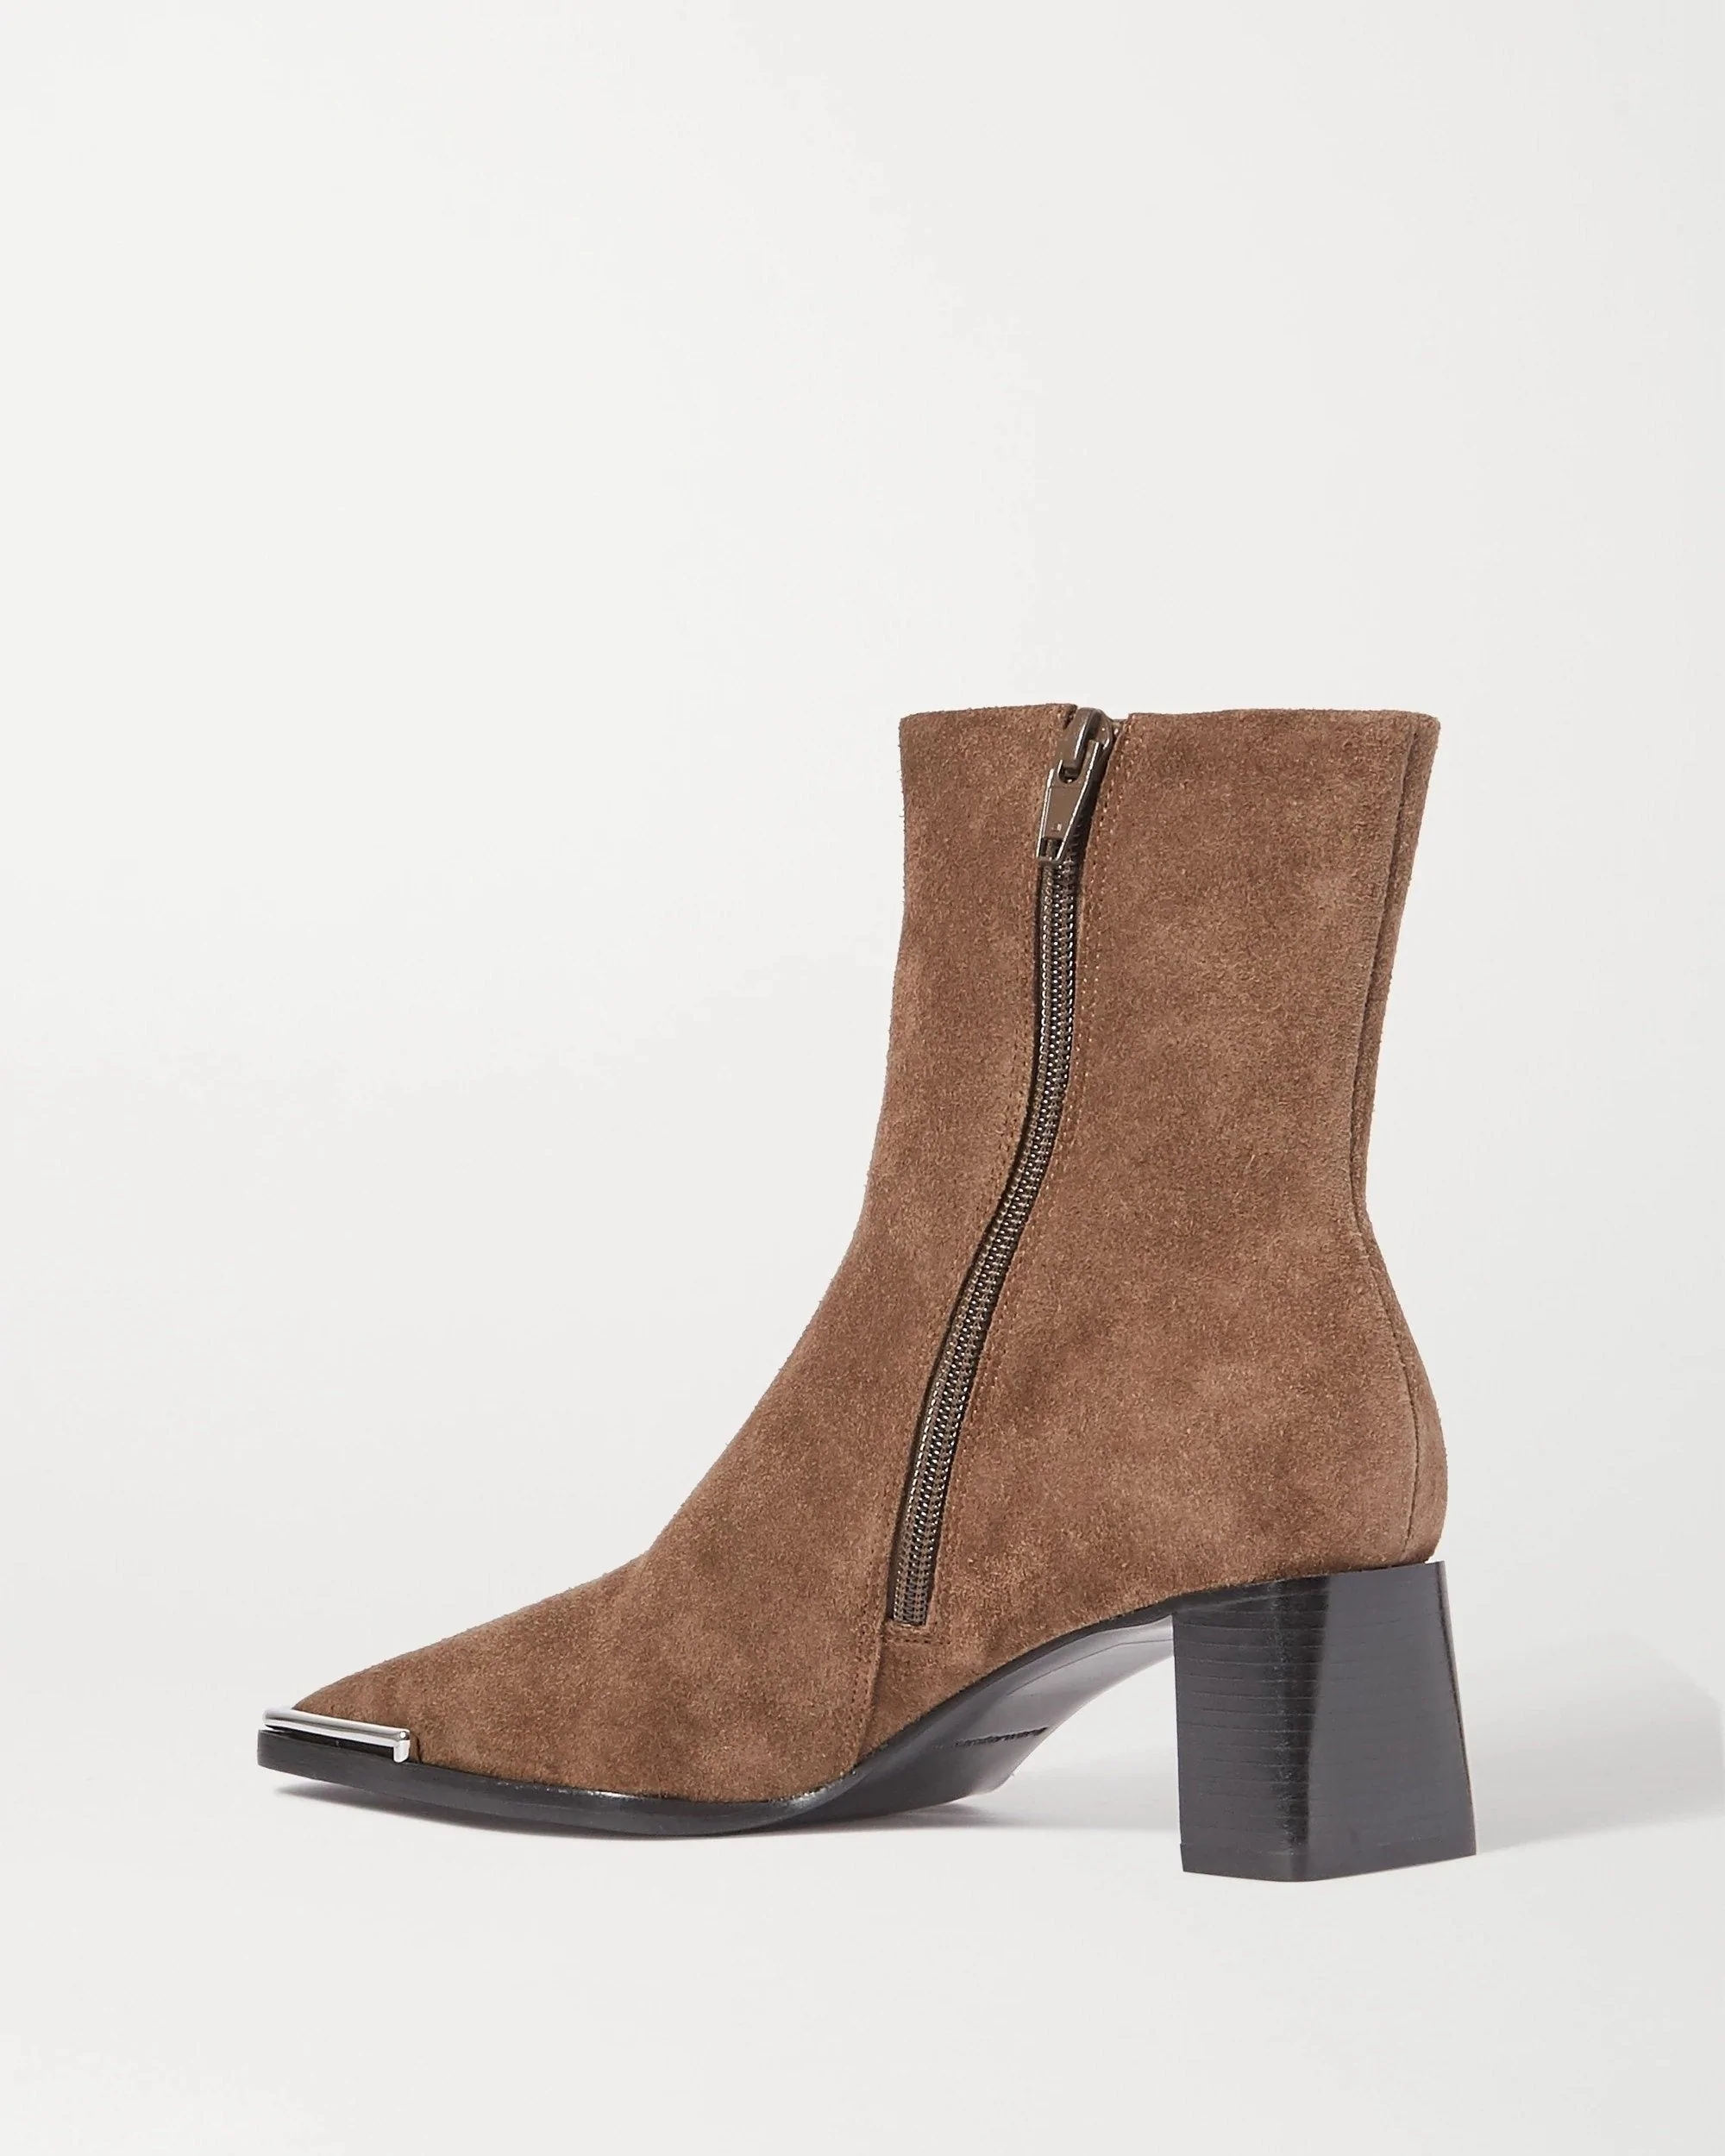 Alexander Wang Mascha Embellished Suede Ankle Boots